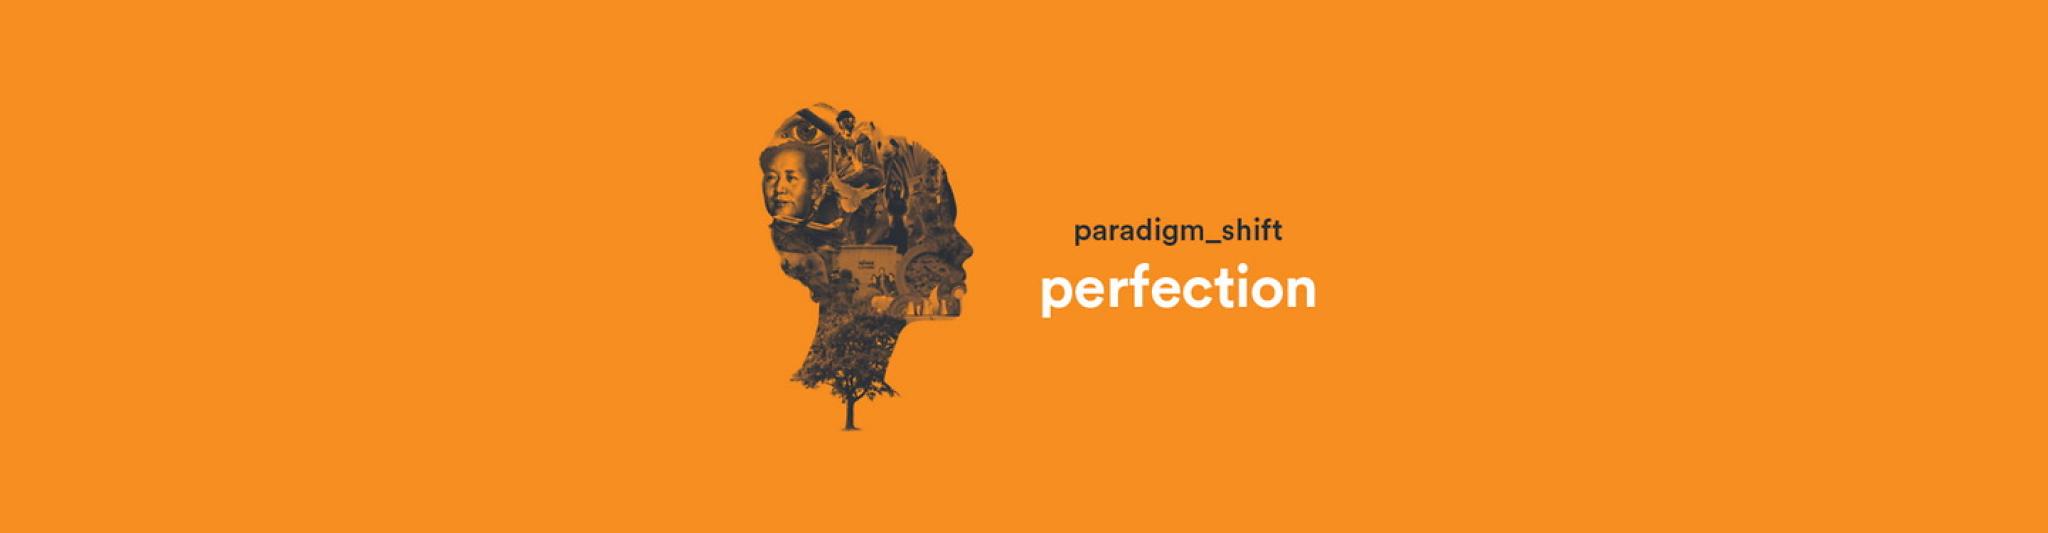 paradigm_shift perfection Banner.png